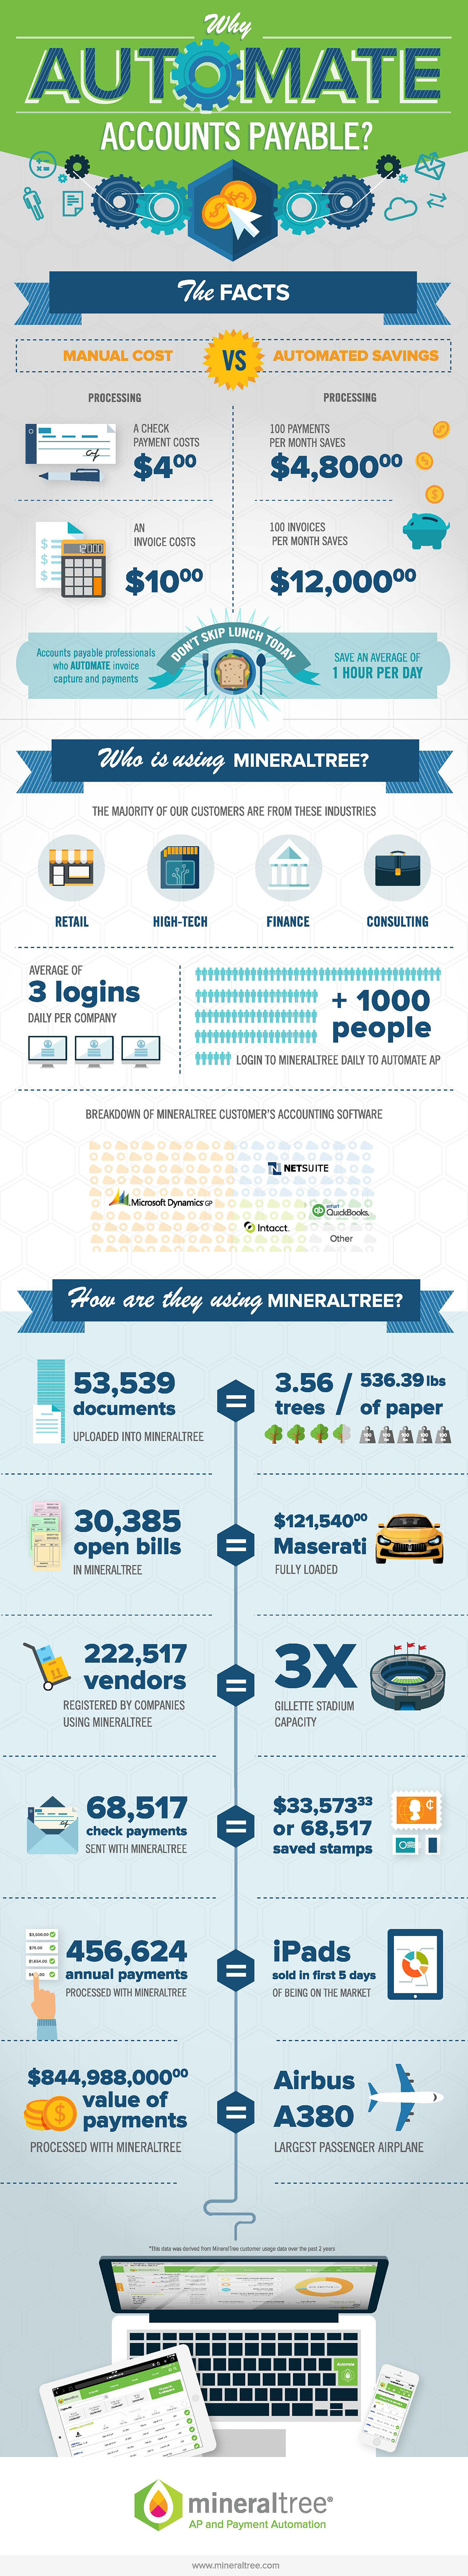 Why Automate Accounts Payable? Infographic